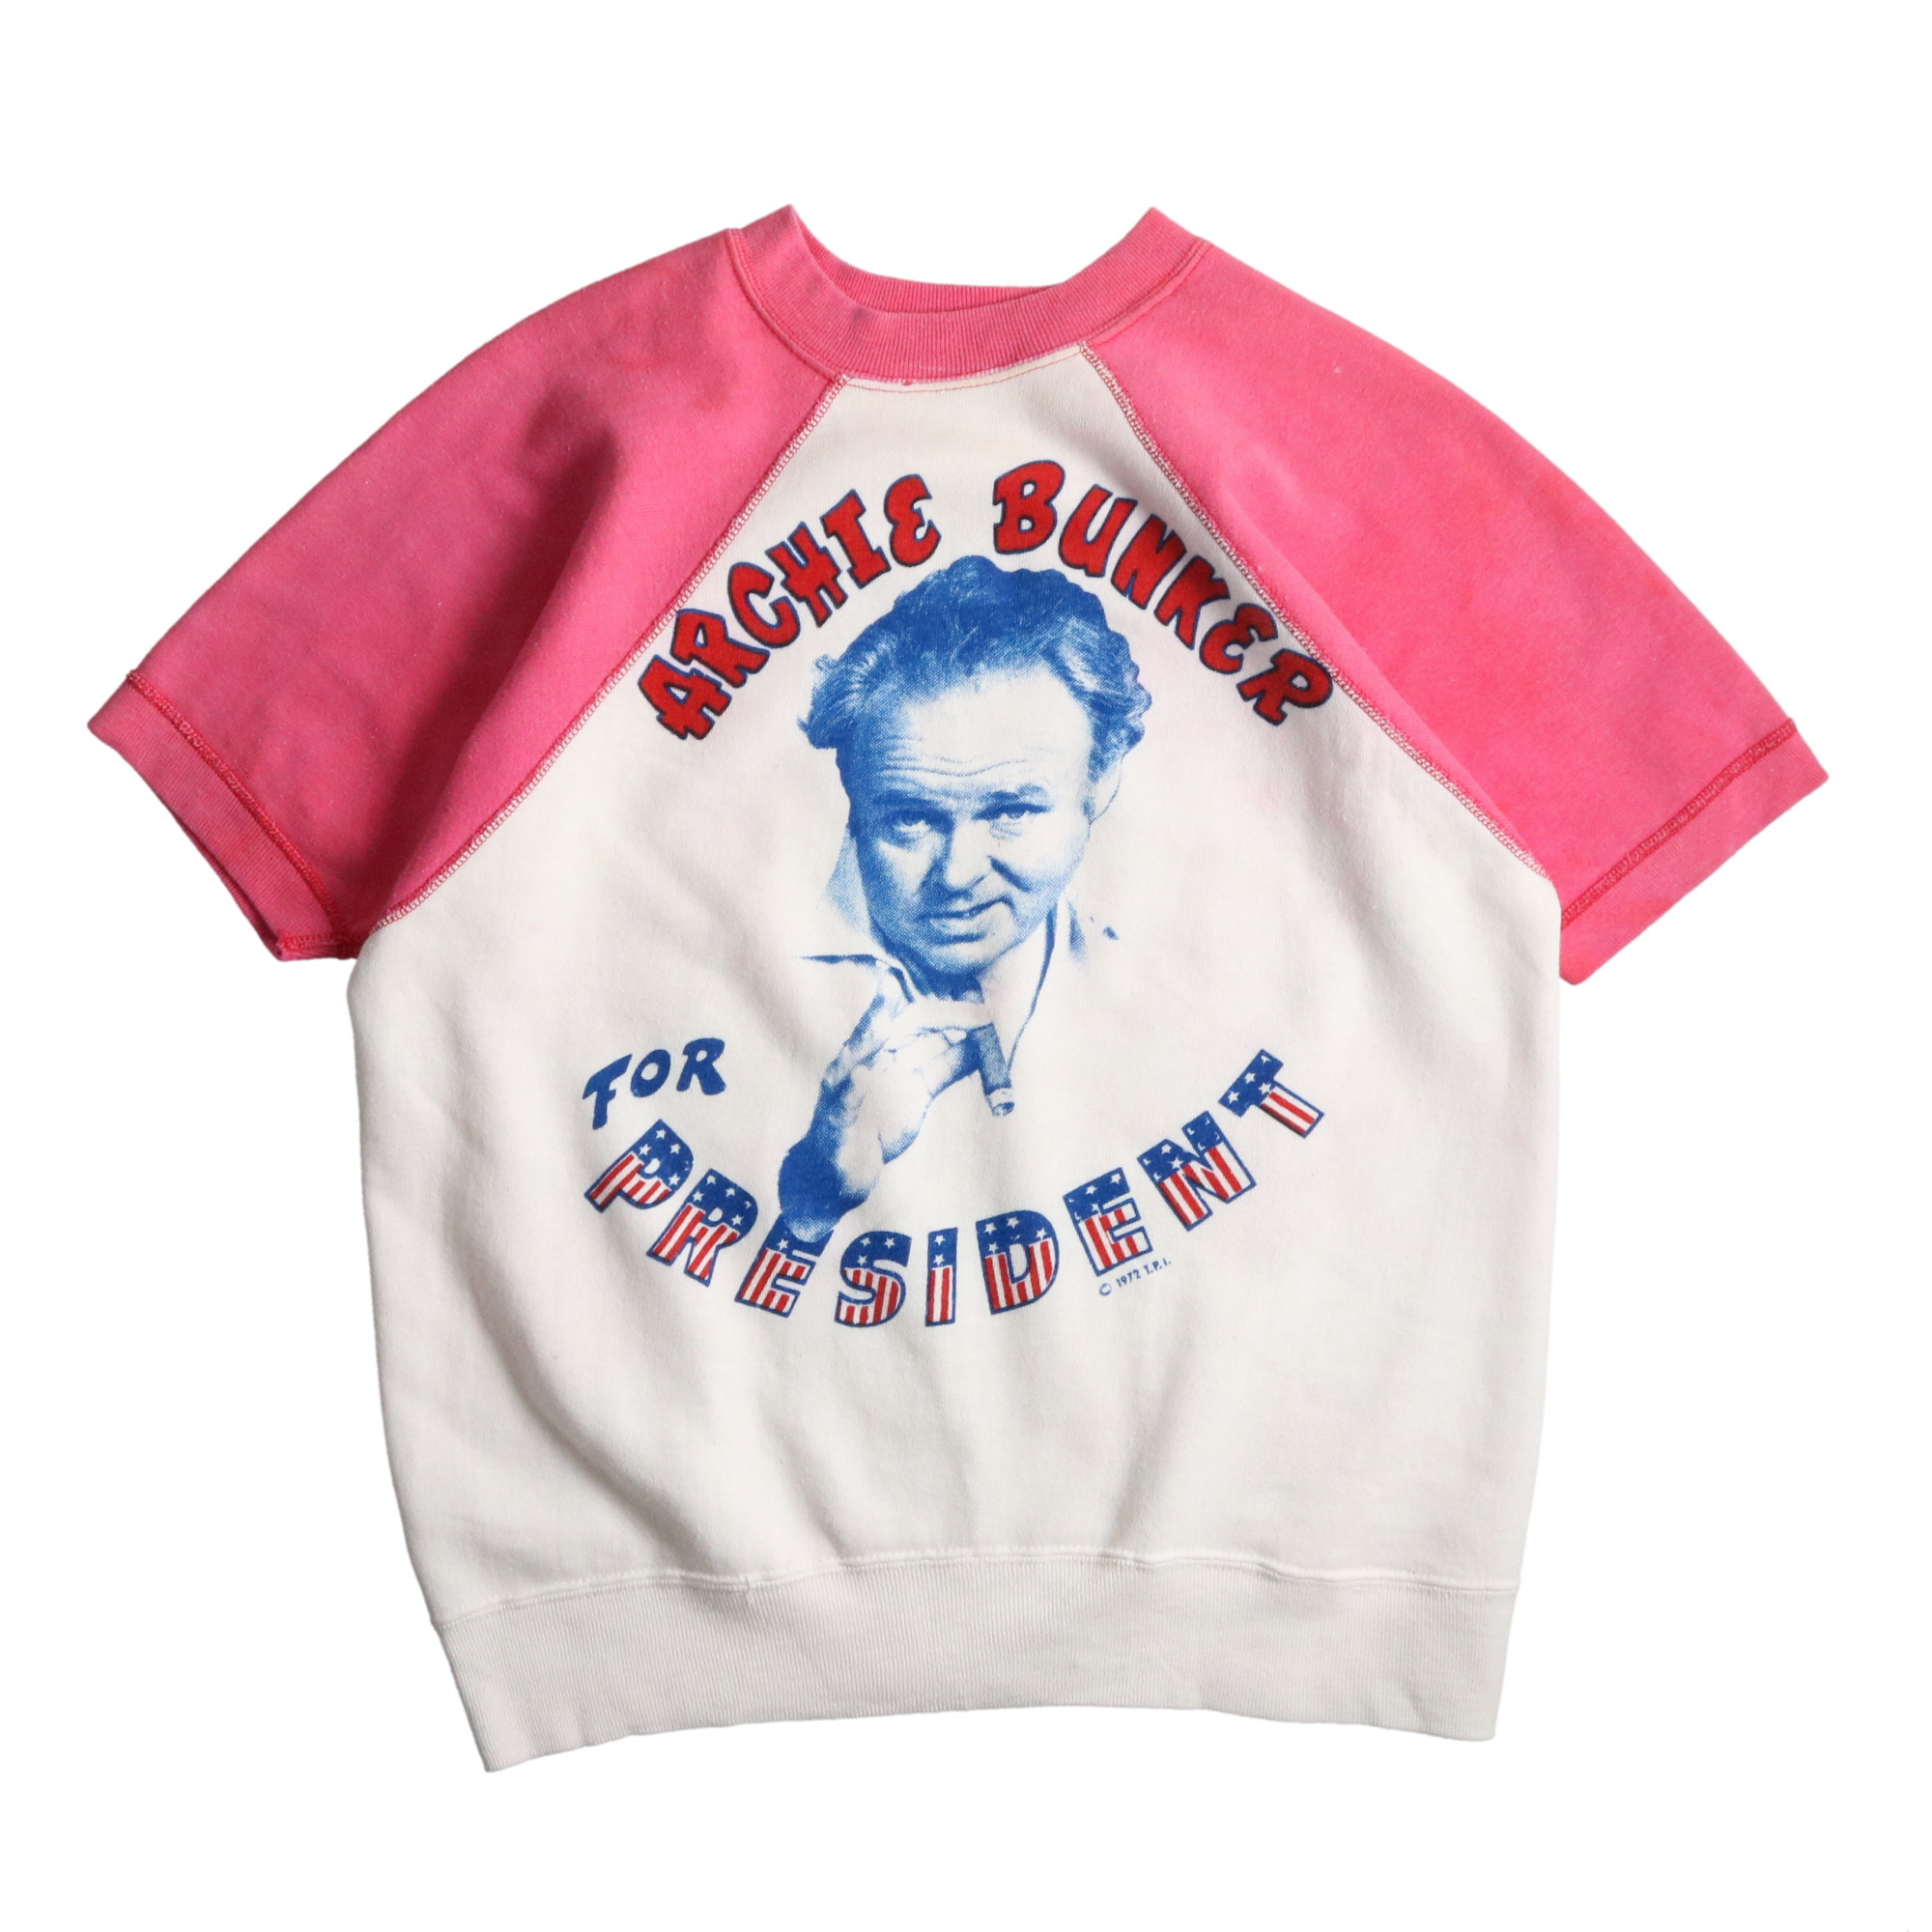 60s ヴィンテージ Archie Bunker アーチバンカー S/S 半袖 スウェット シャツ 染込みプリント 白 ホワイト 桃 ピンク